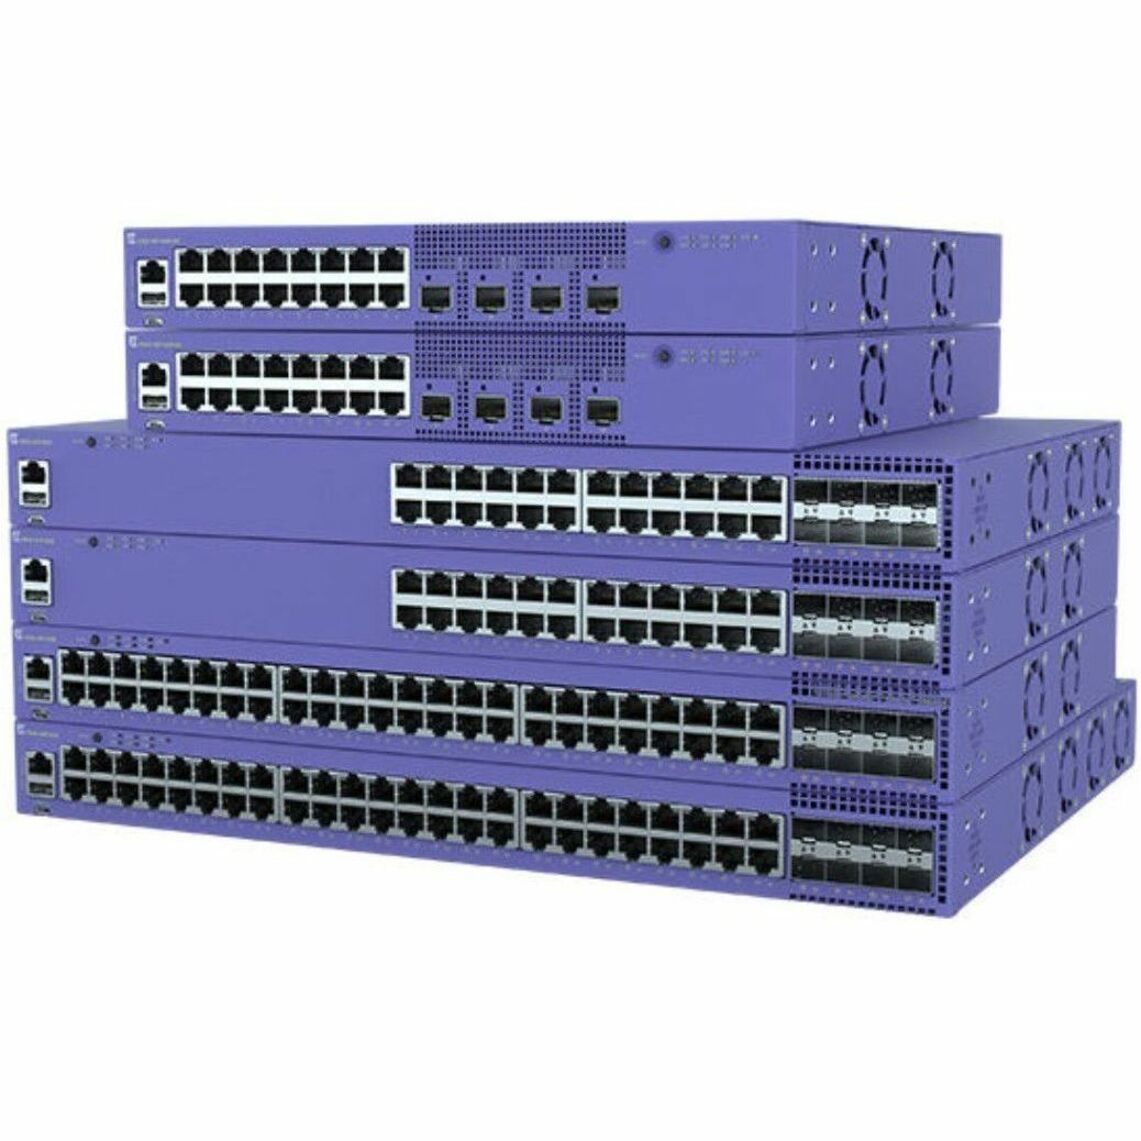 Extreme Networks ExtremeSwitching 5320 Ethernet Switch (5320-24T-8XE)